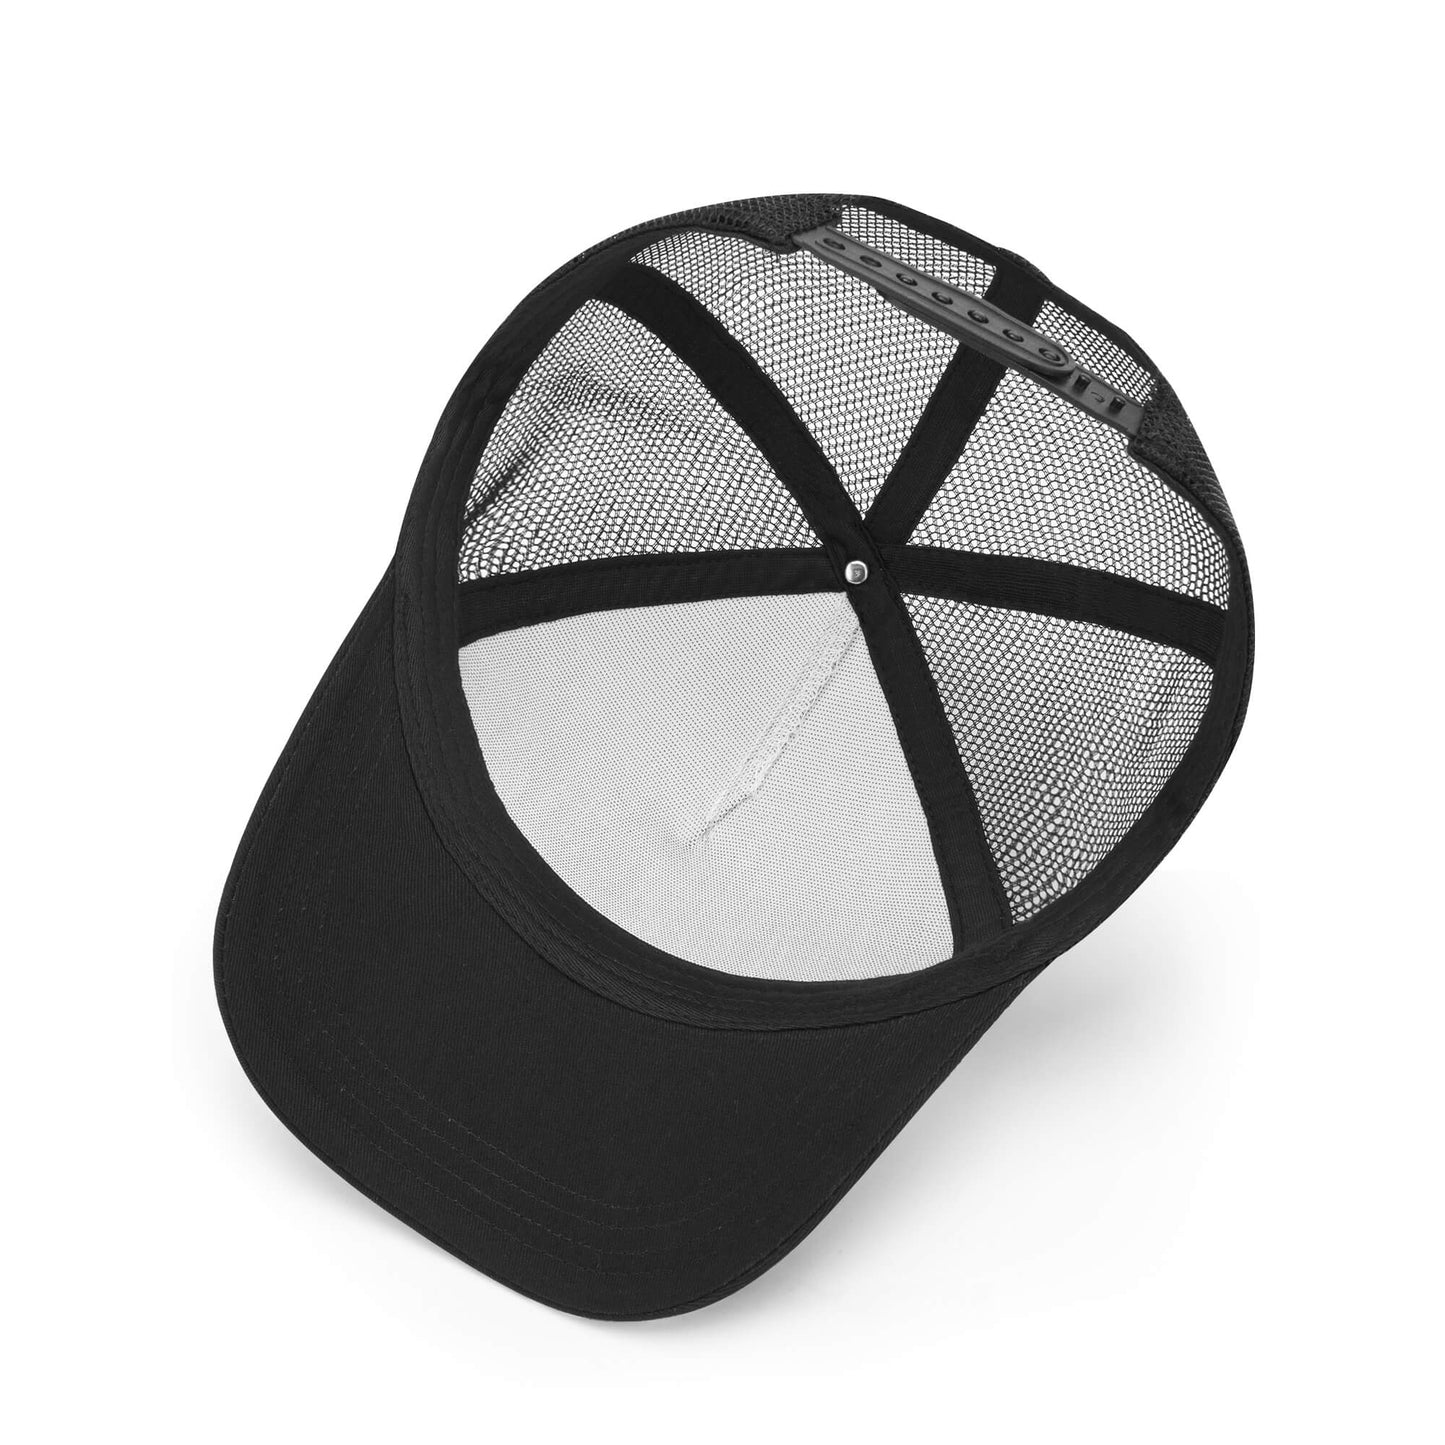 SK8 FreeStyle God Connected Mesh Trucker Hat